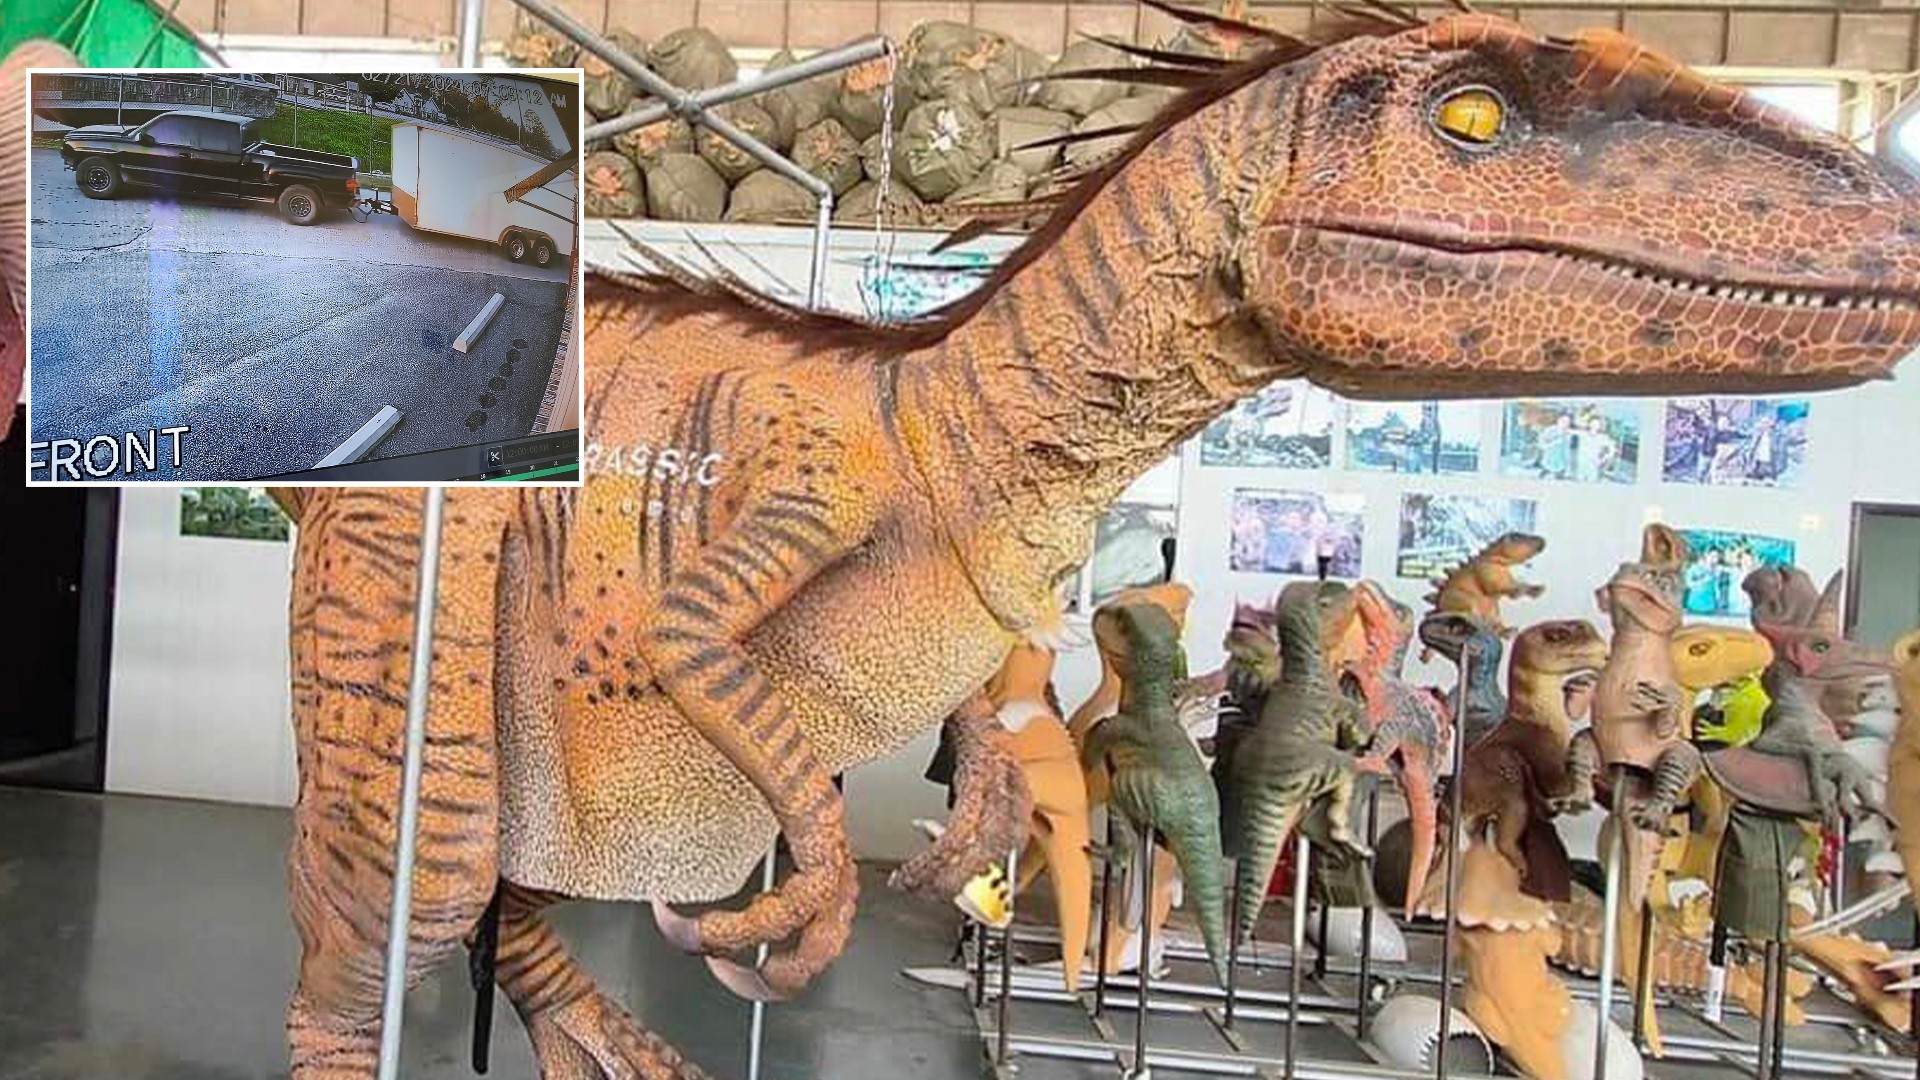 Owner Oscar Bravo said the alleged thieves took off with $15,000 worth of goods, including the dinosaur costumes and trailer.